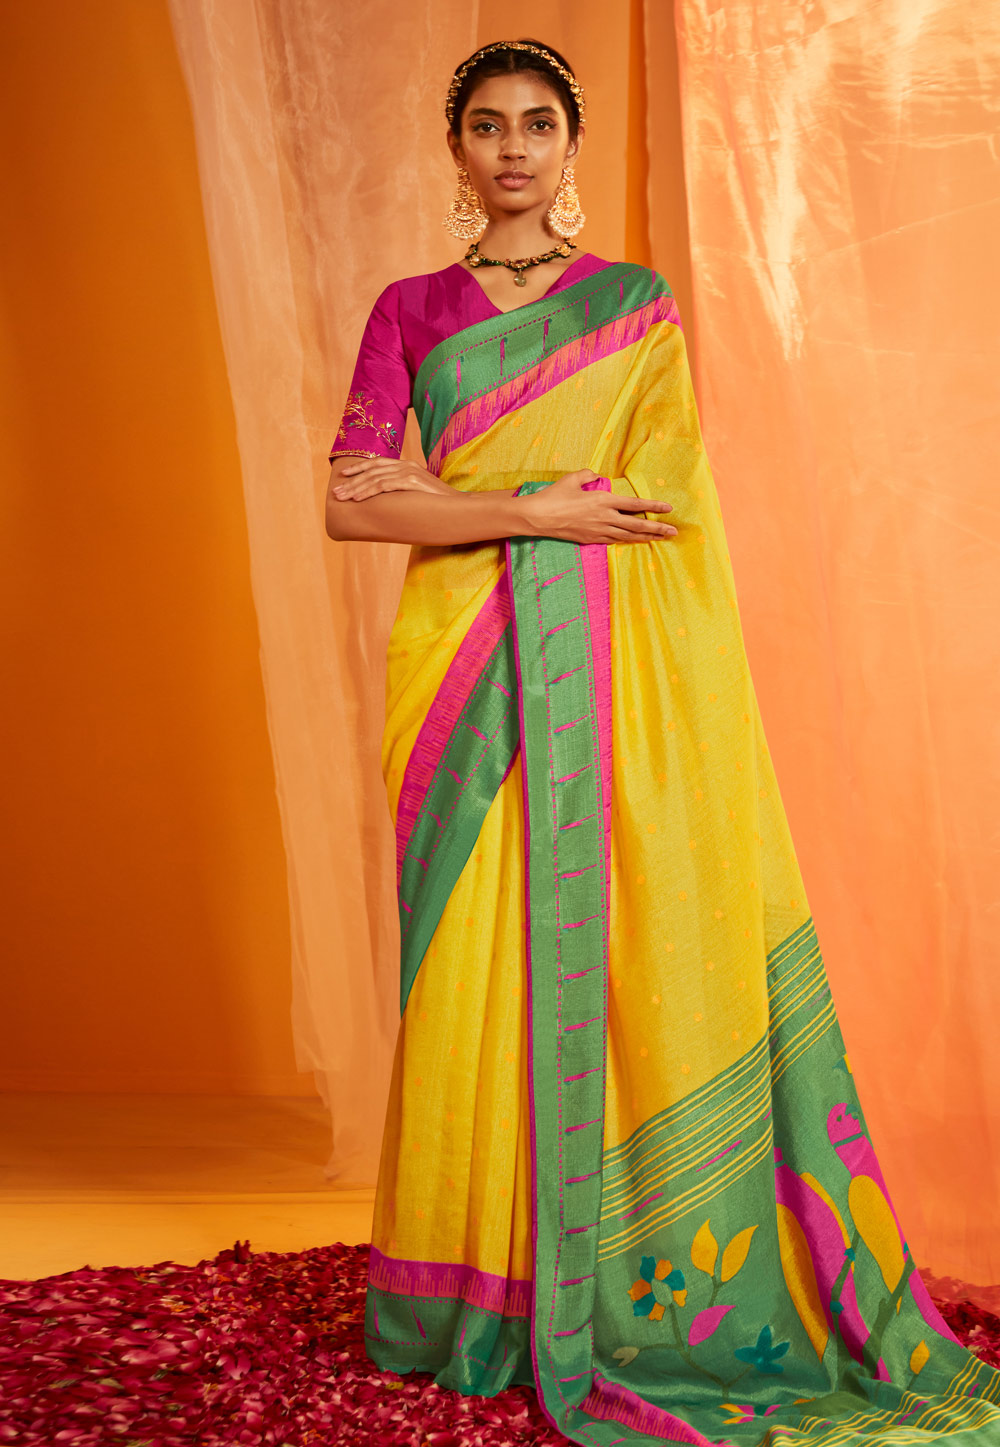 Light yellow Georgette Brasso Saree with Tassels | GLAMOUR-2163 | Cilory.com